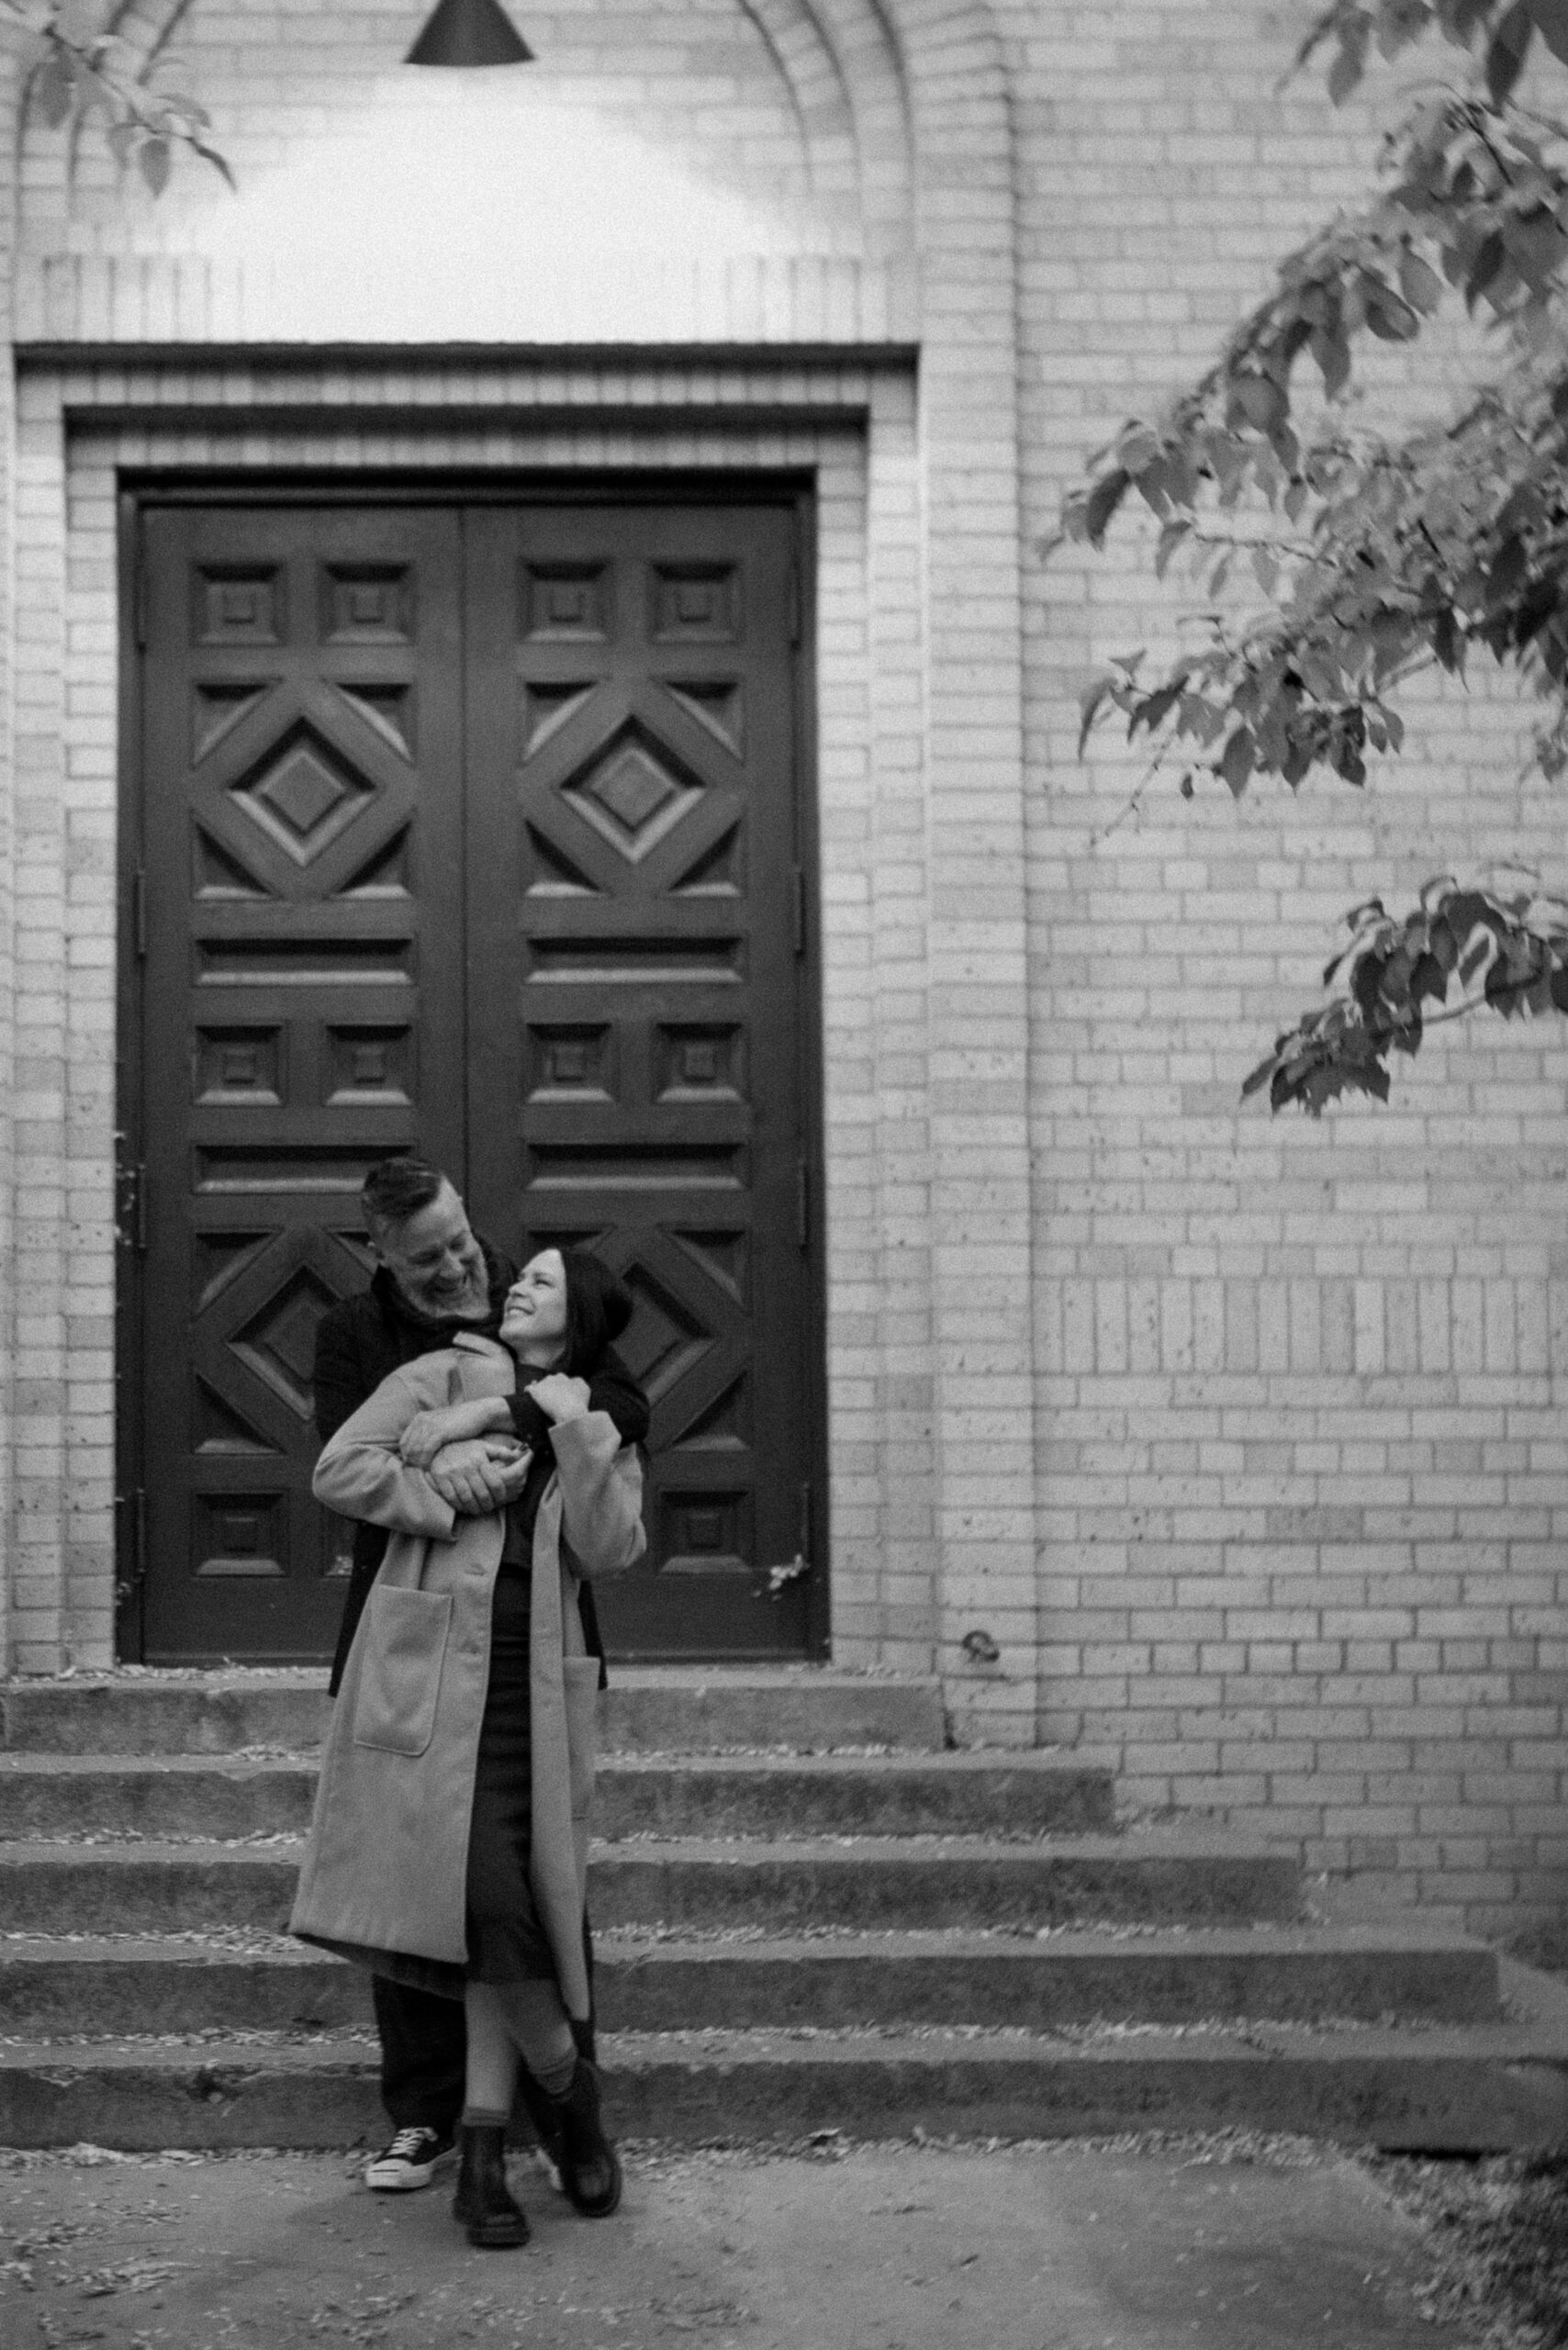 A black and white photo of an engaged couple embracing one another in front of The Smiley Building in Durango, Colorado for their engagement session, taken by Colorado wedding photographer, Ashley Joyce.